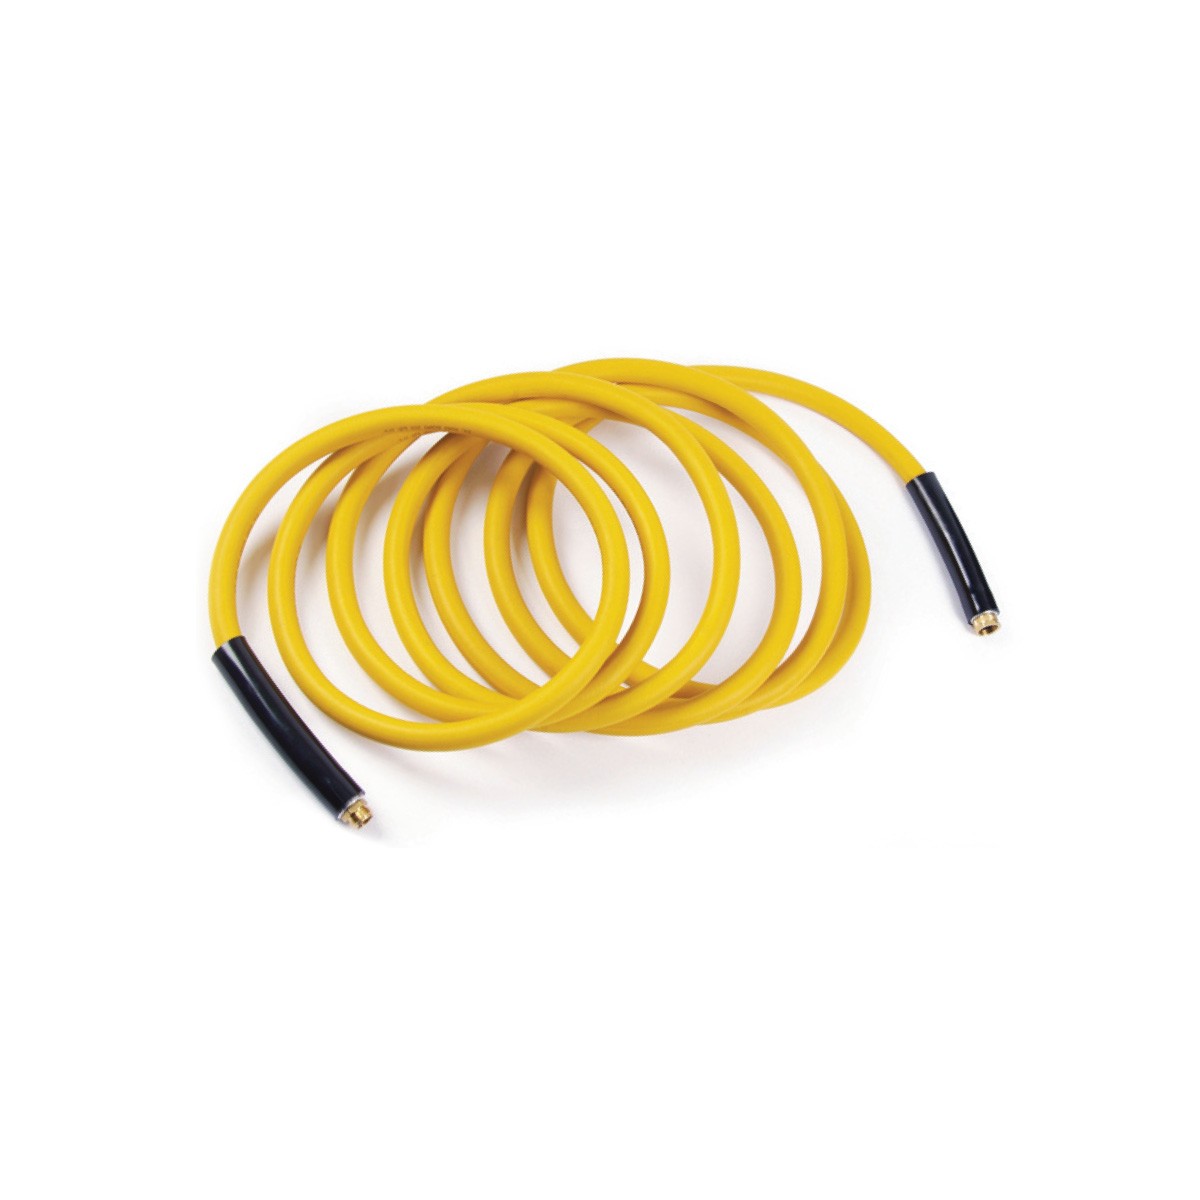 High Quality 3 Layer Garden Hose 1/2 Inch Yellow 50&25meter